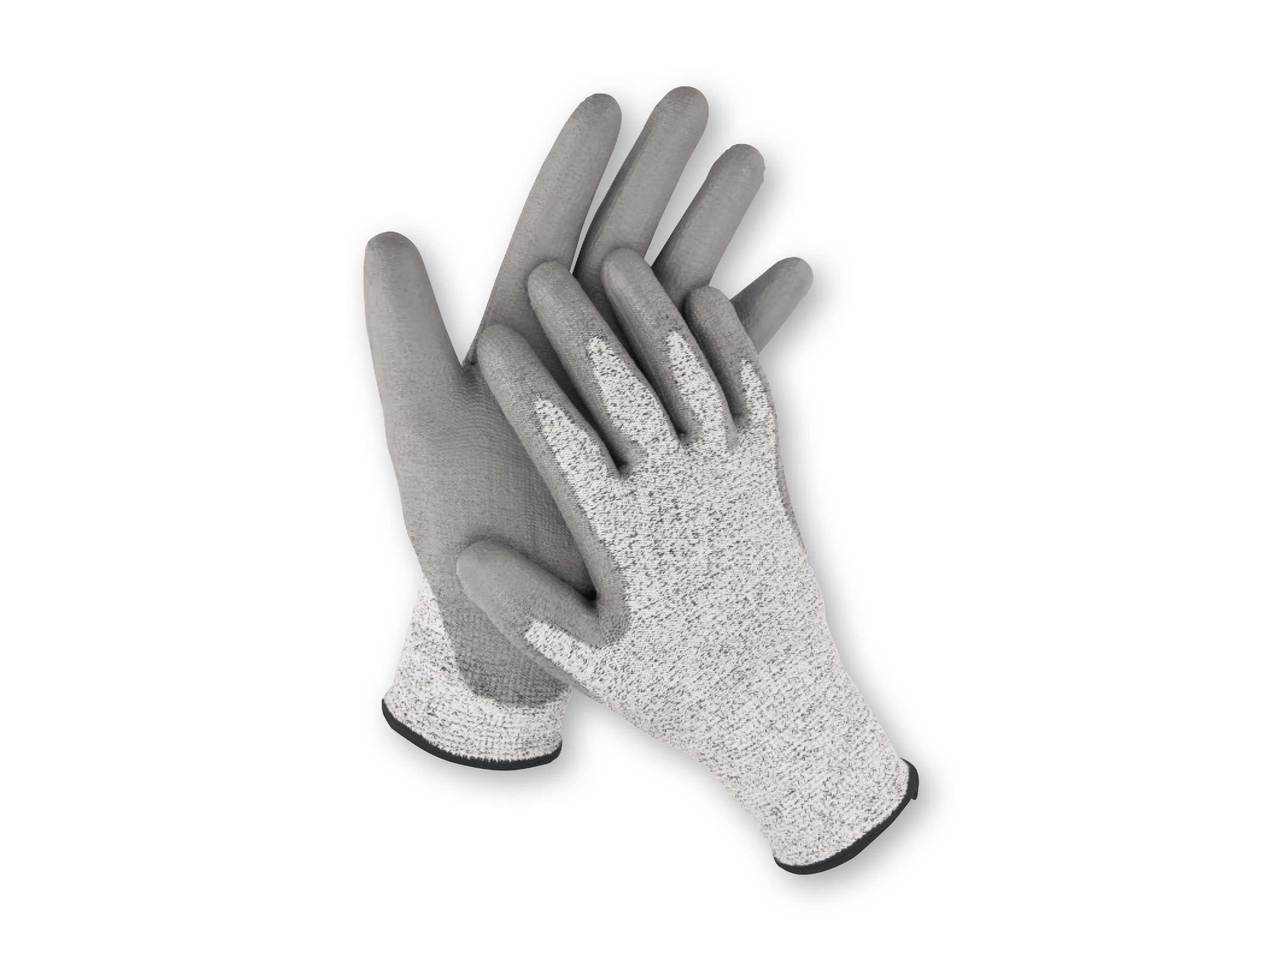 POWERFIX(R) Protective Gloves